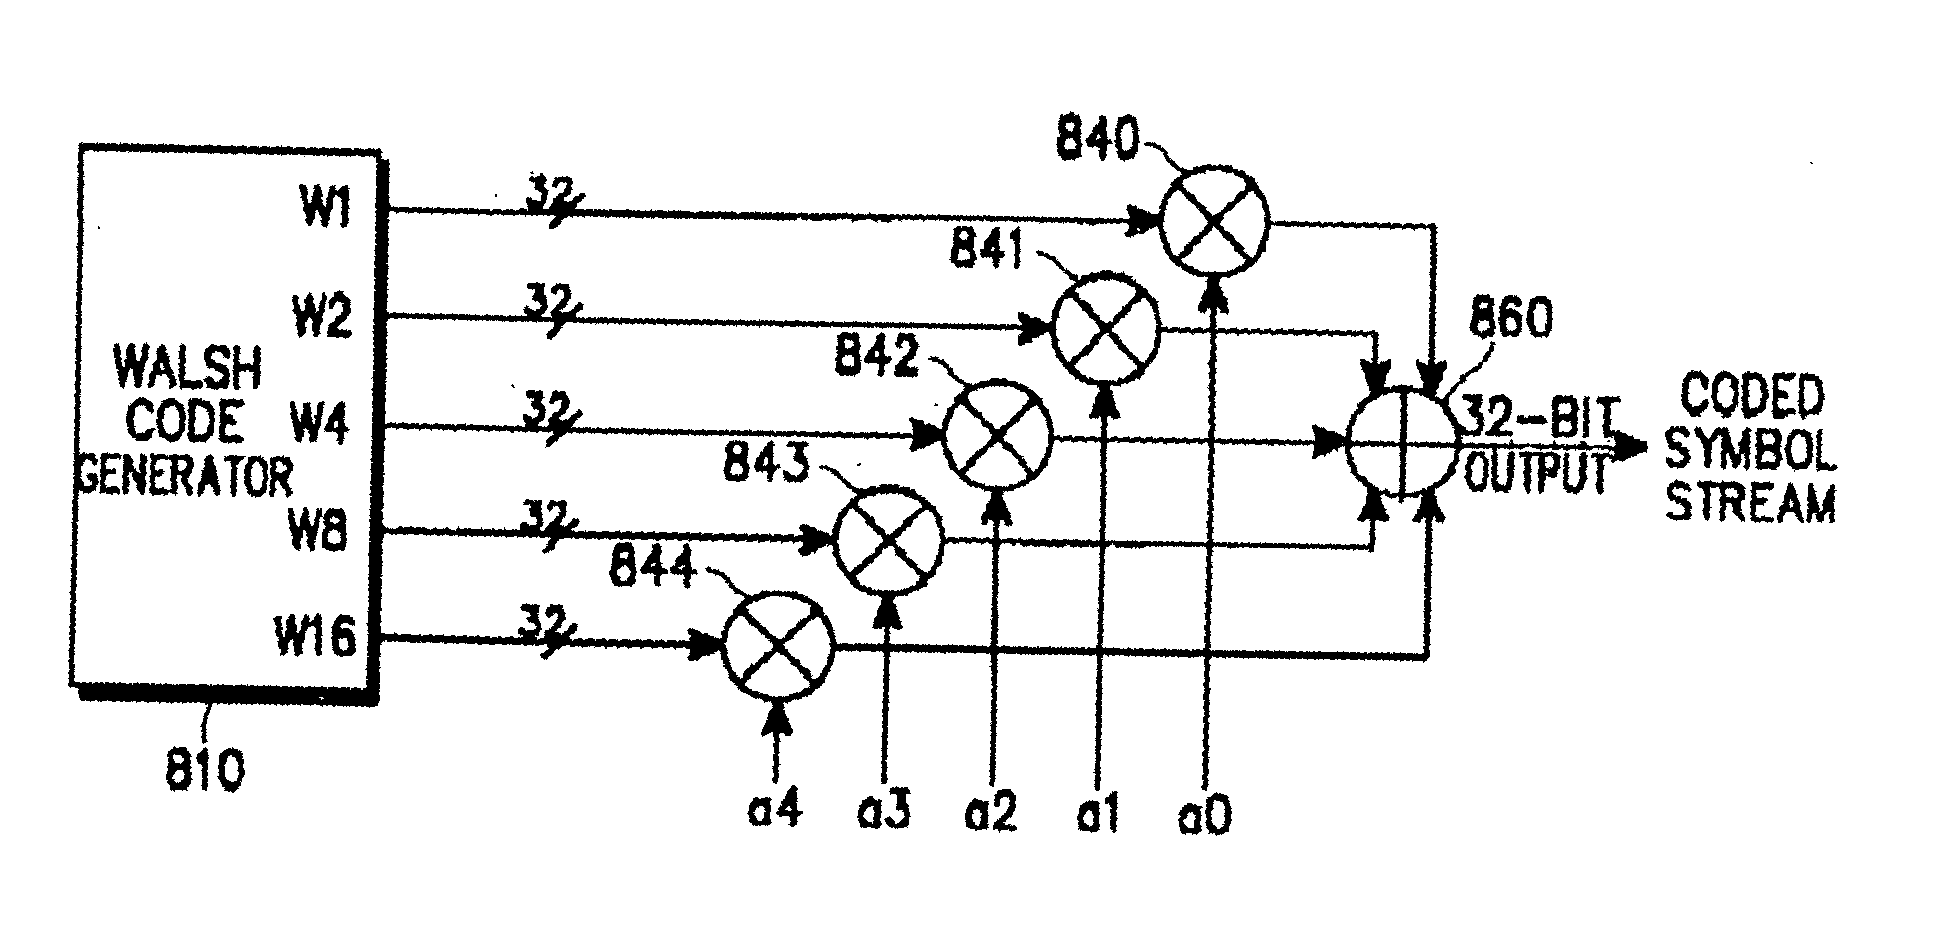 Channel coding/decoding apparatus and method for a CDMA mobile communication system